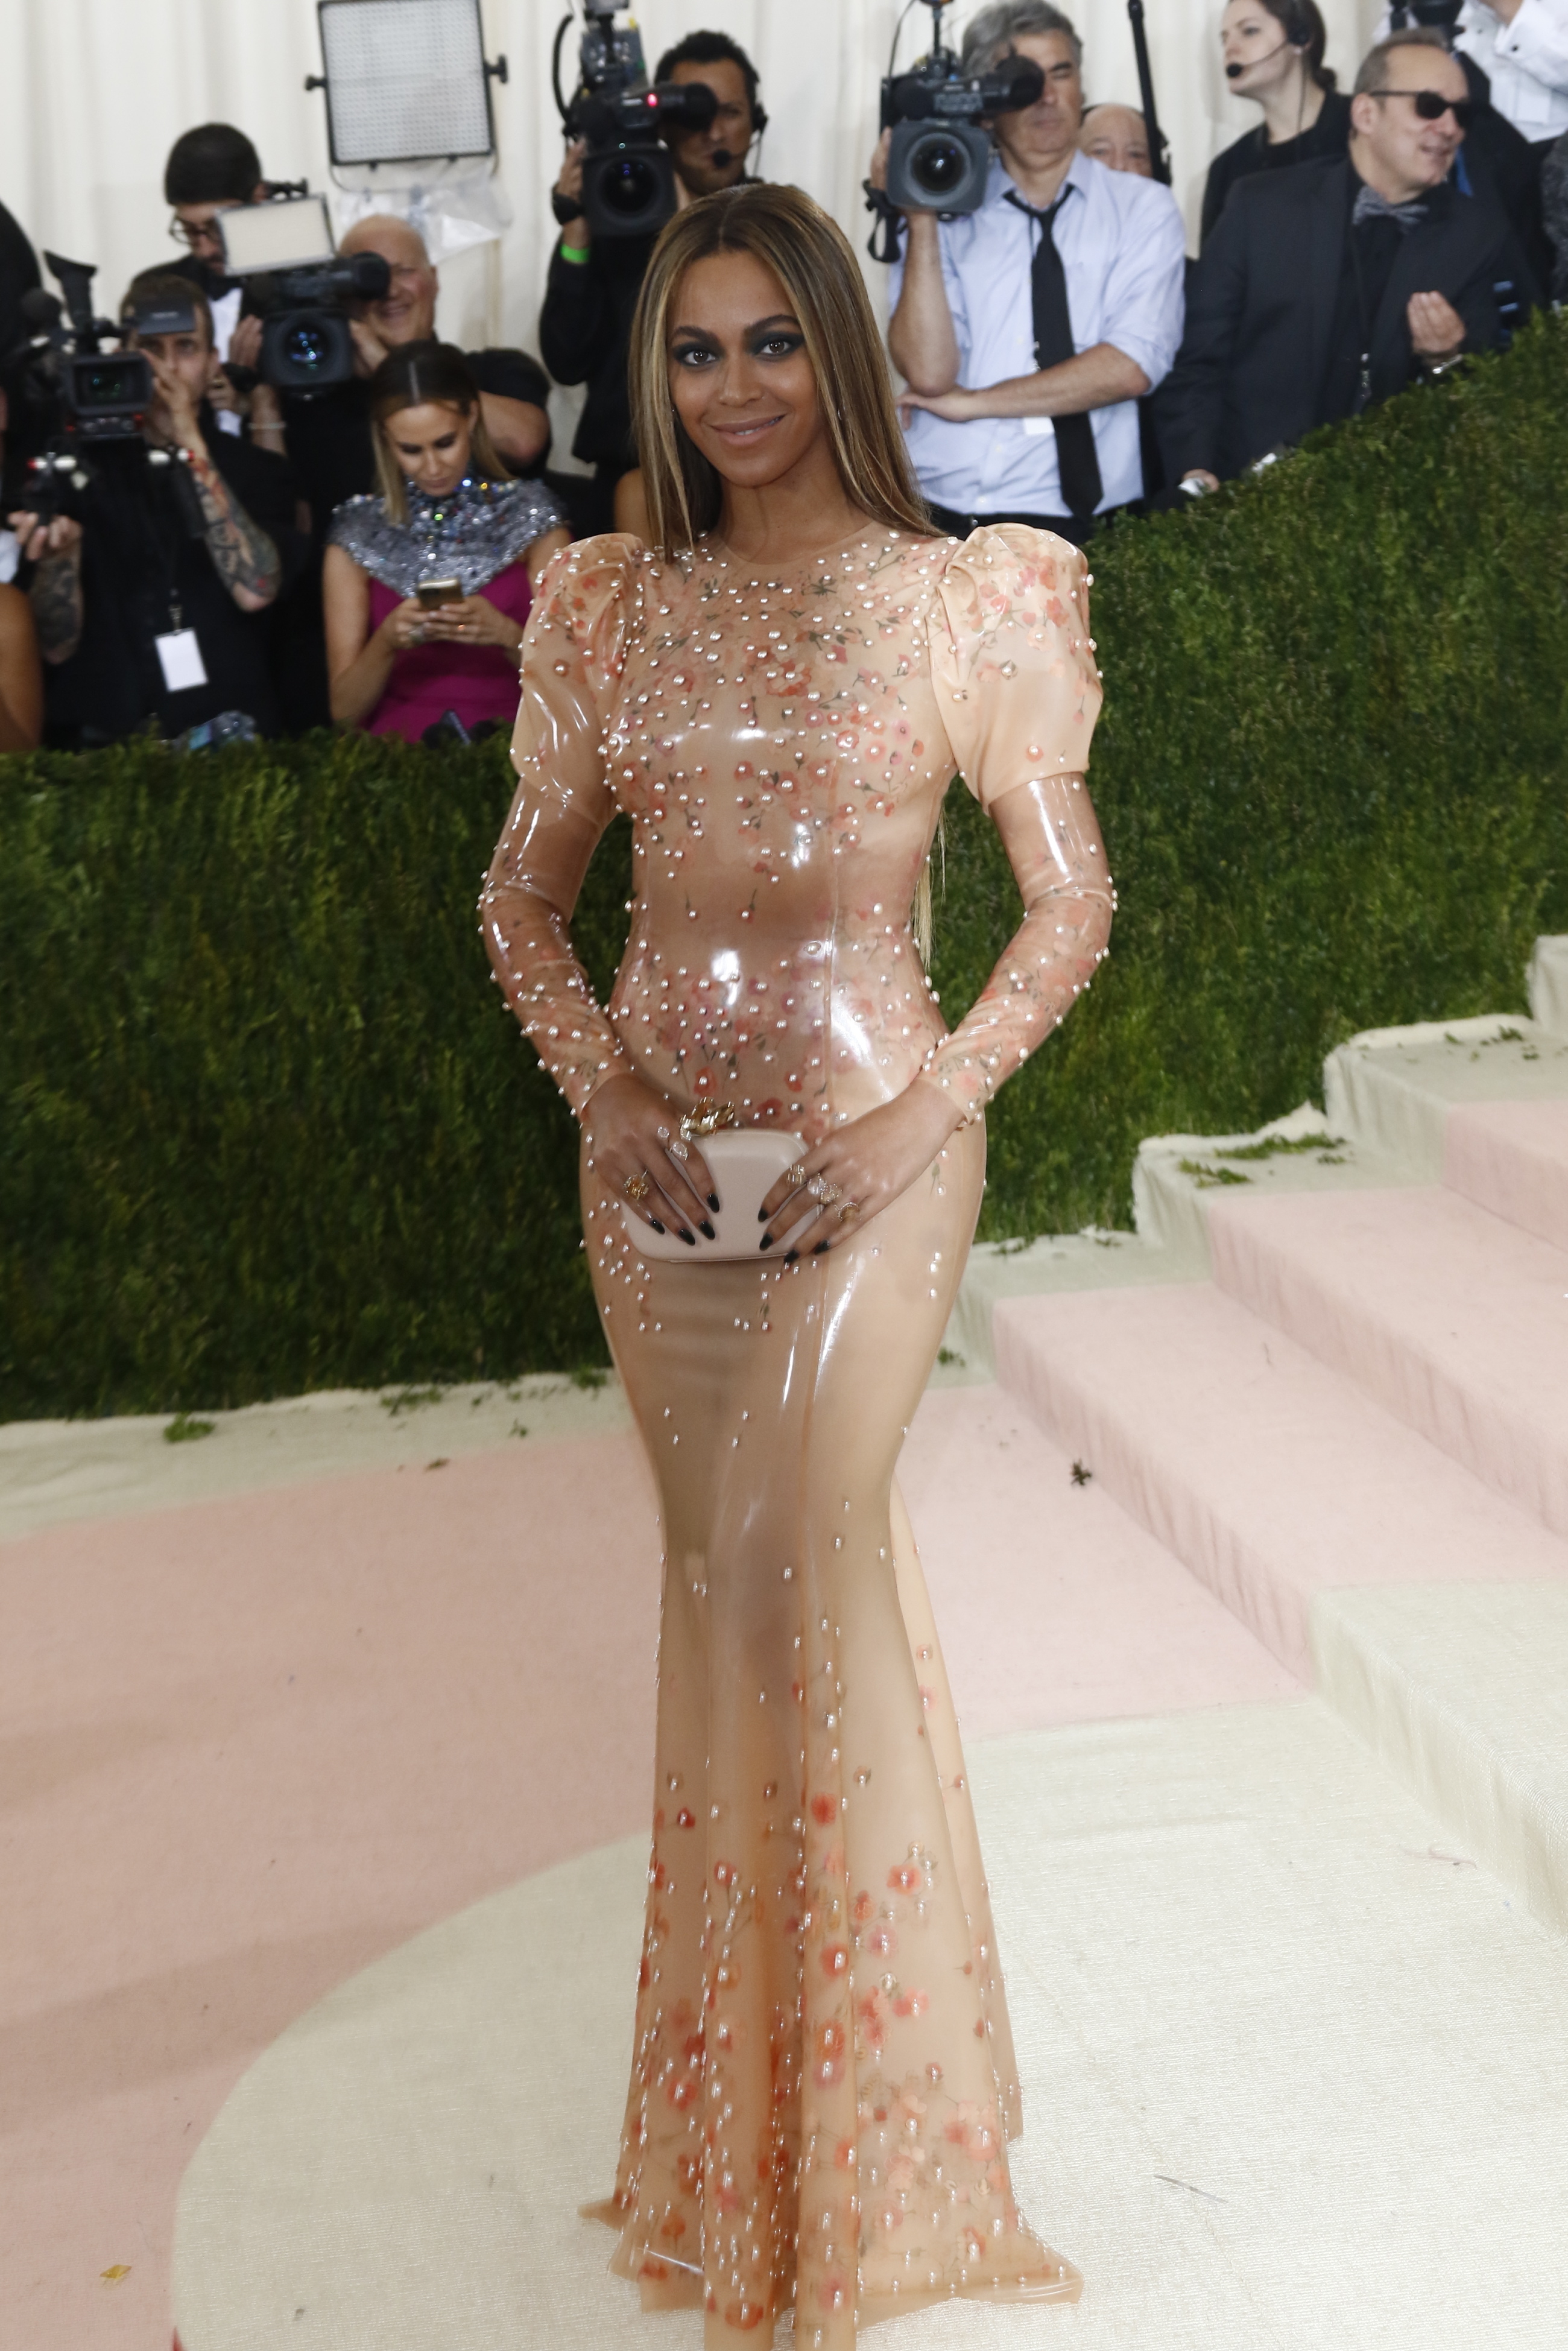 Beyoncé in a sheer, embellished gown at an event, with photographers in the background